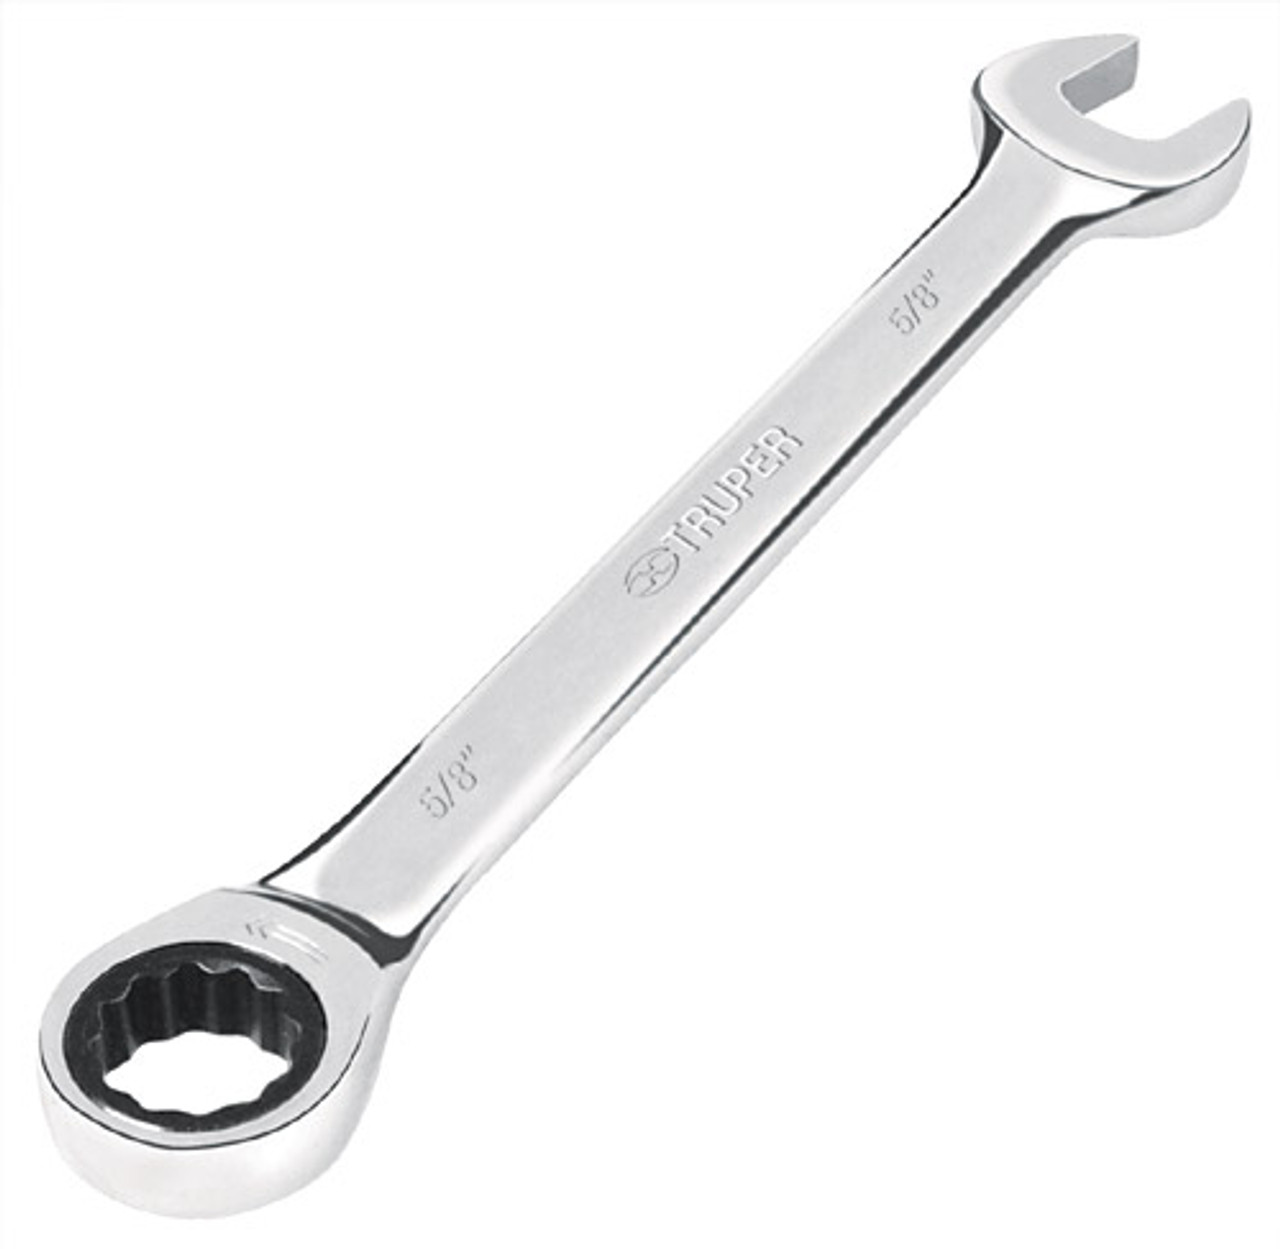 Truper 7/16x6.4" Combination Ratcheting Wrench #15737-2 Pack